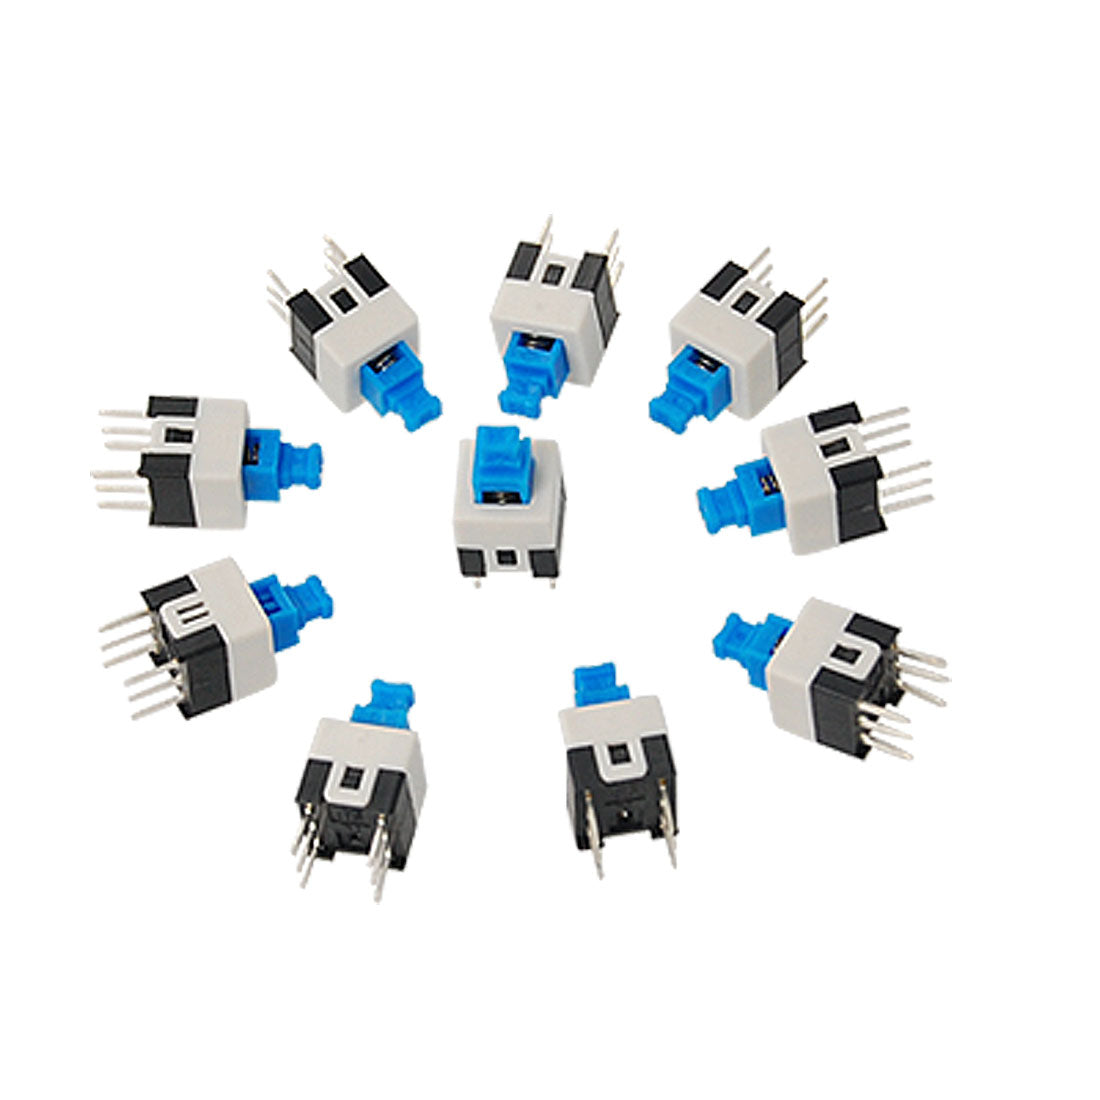 uxcell Uxcell 10 Pcs 7 x 7mm PCB Momentary Tact Tactile Push Button Switch Non Lock 6 Pin DIP